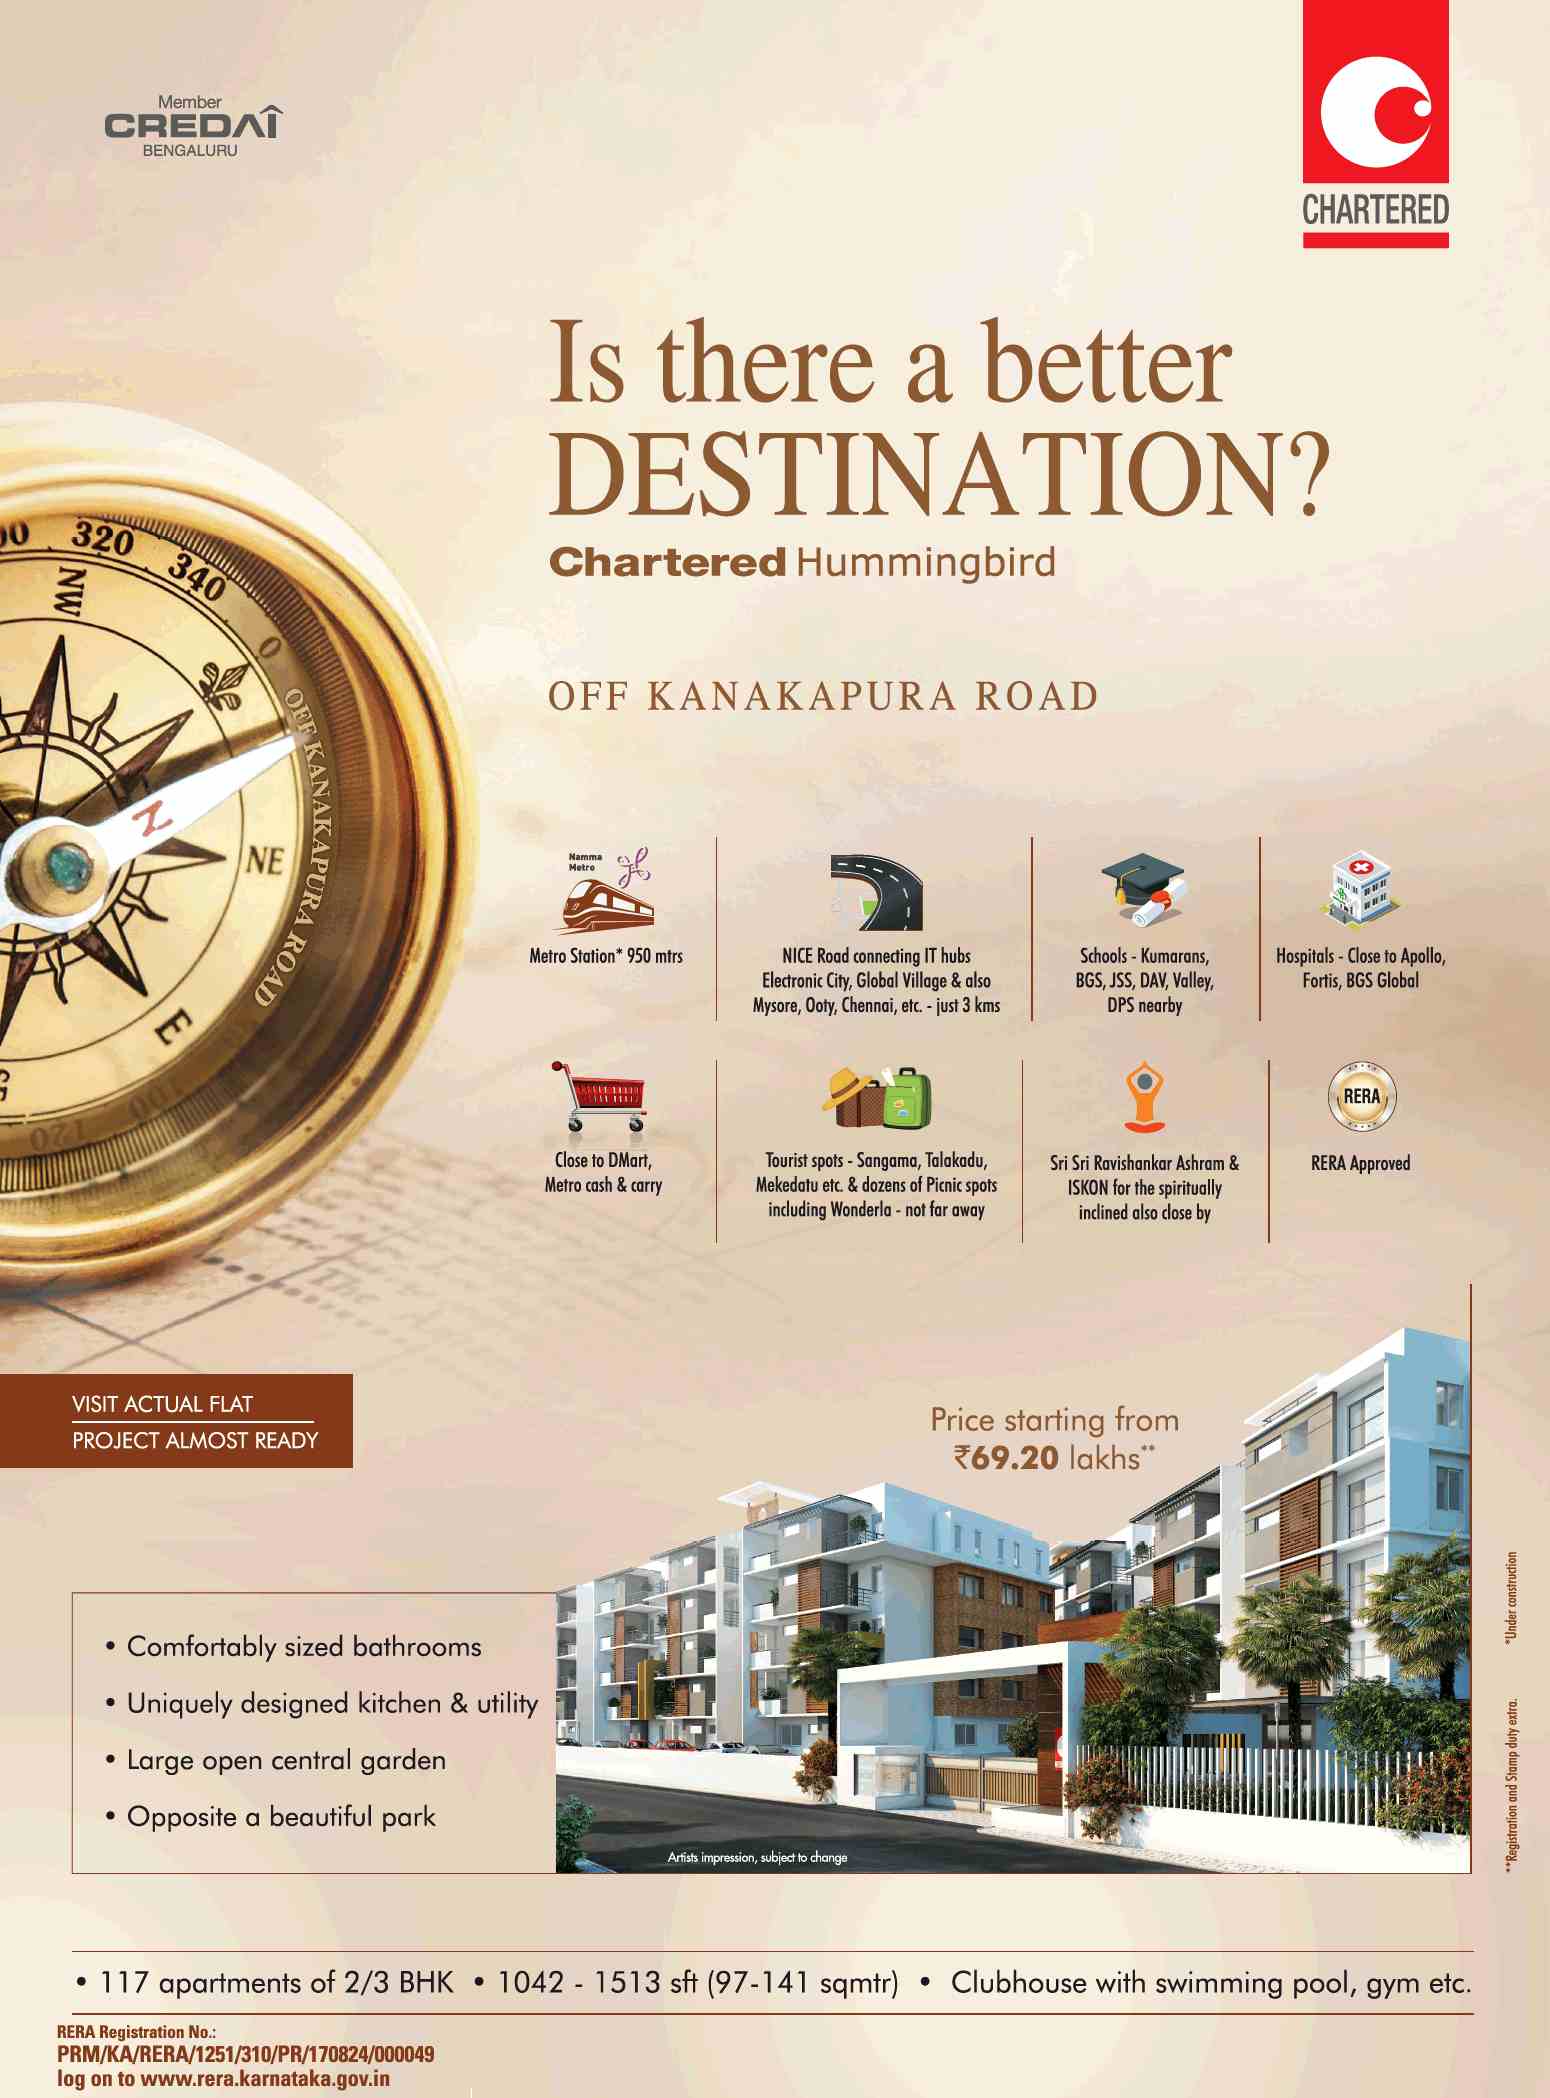 Book home with best destination @ Rs 69.20 Lakh at Chartered Hummingbird in Bangalore